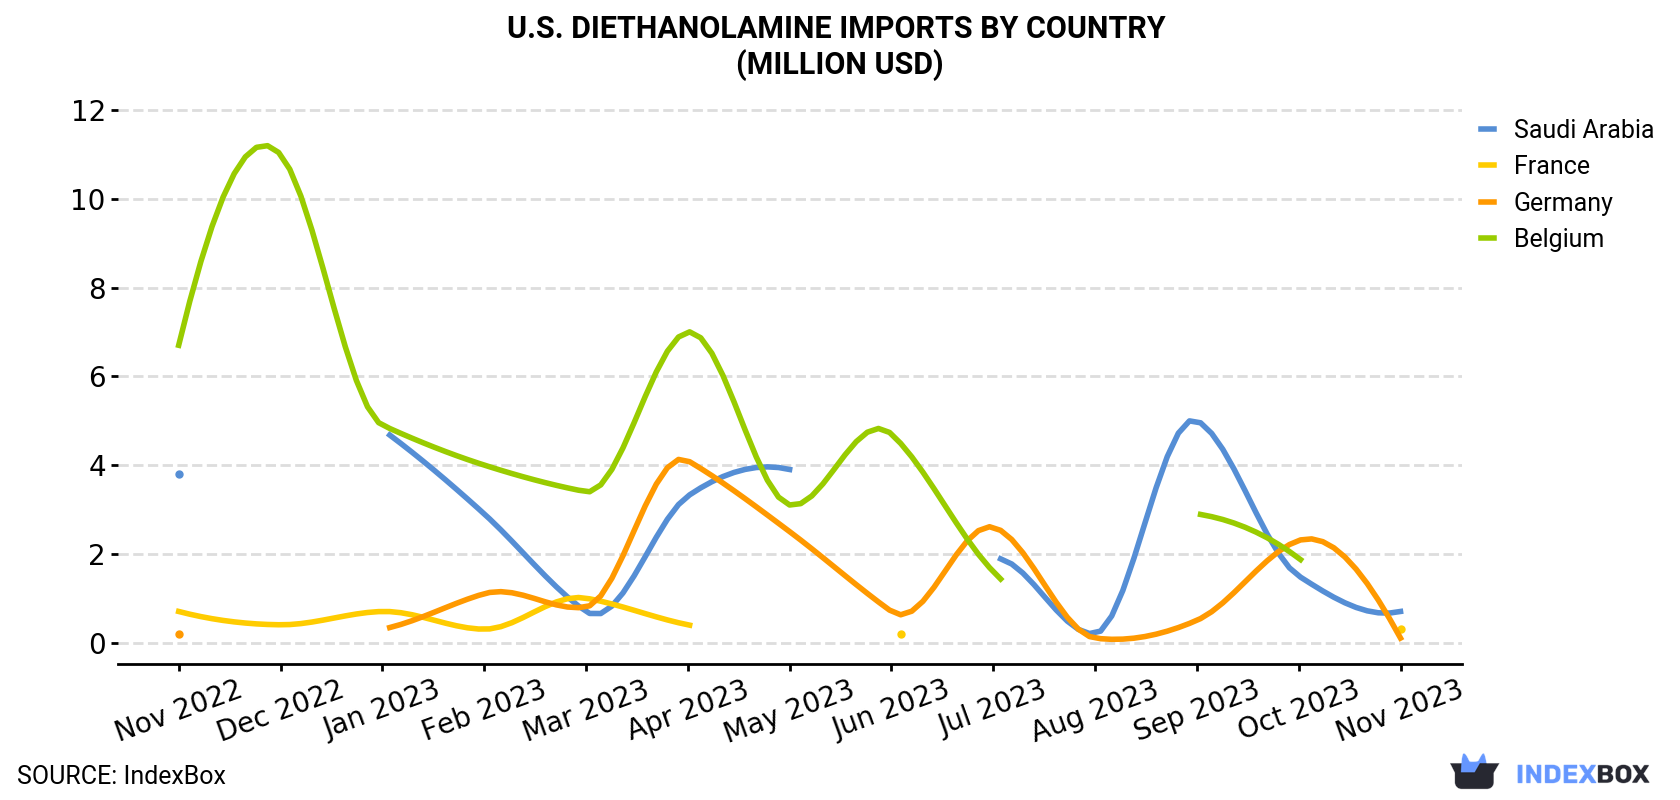 U.S. Diethanolamine Imports By Country (Million USD)